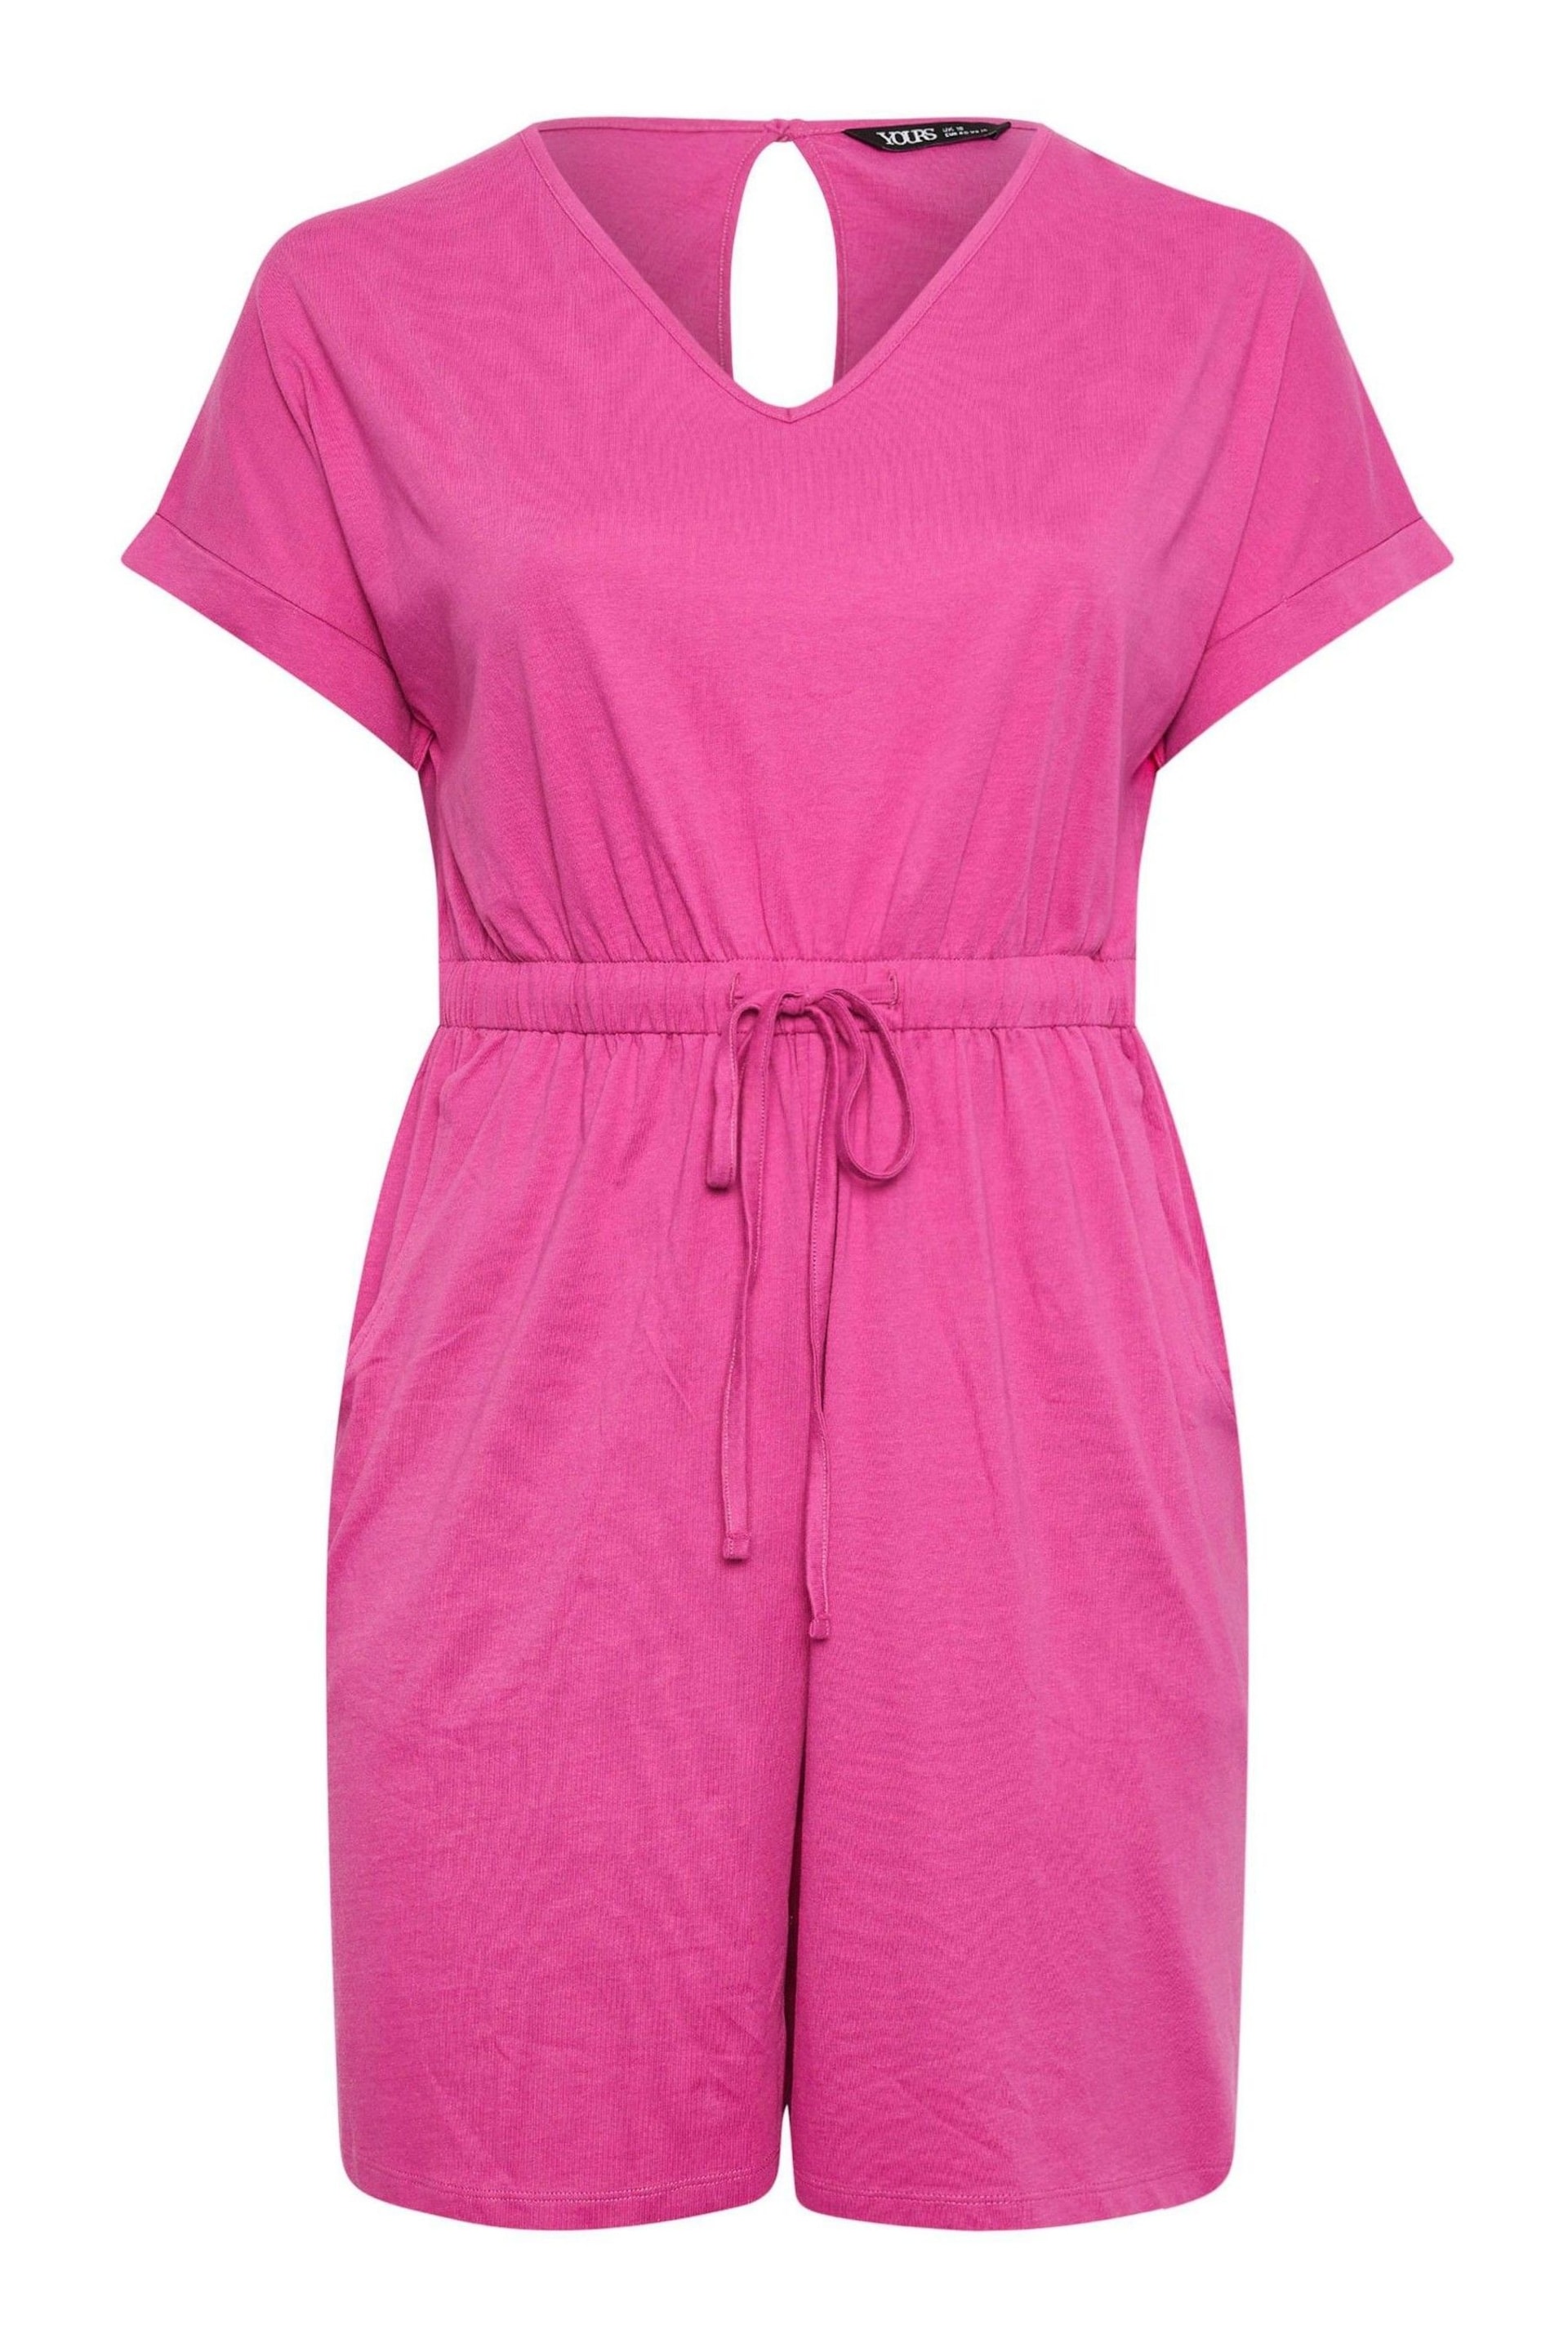 Yours Curve Hot Pink Limited Collection Drawstring Playsuit - Image 5 of 5